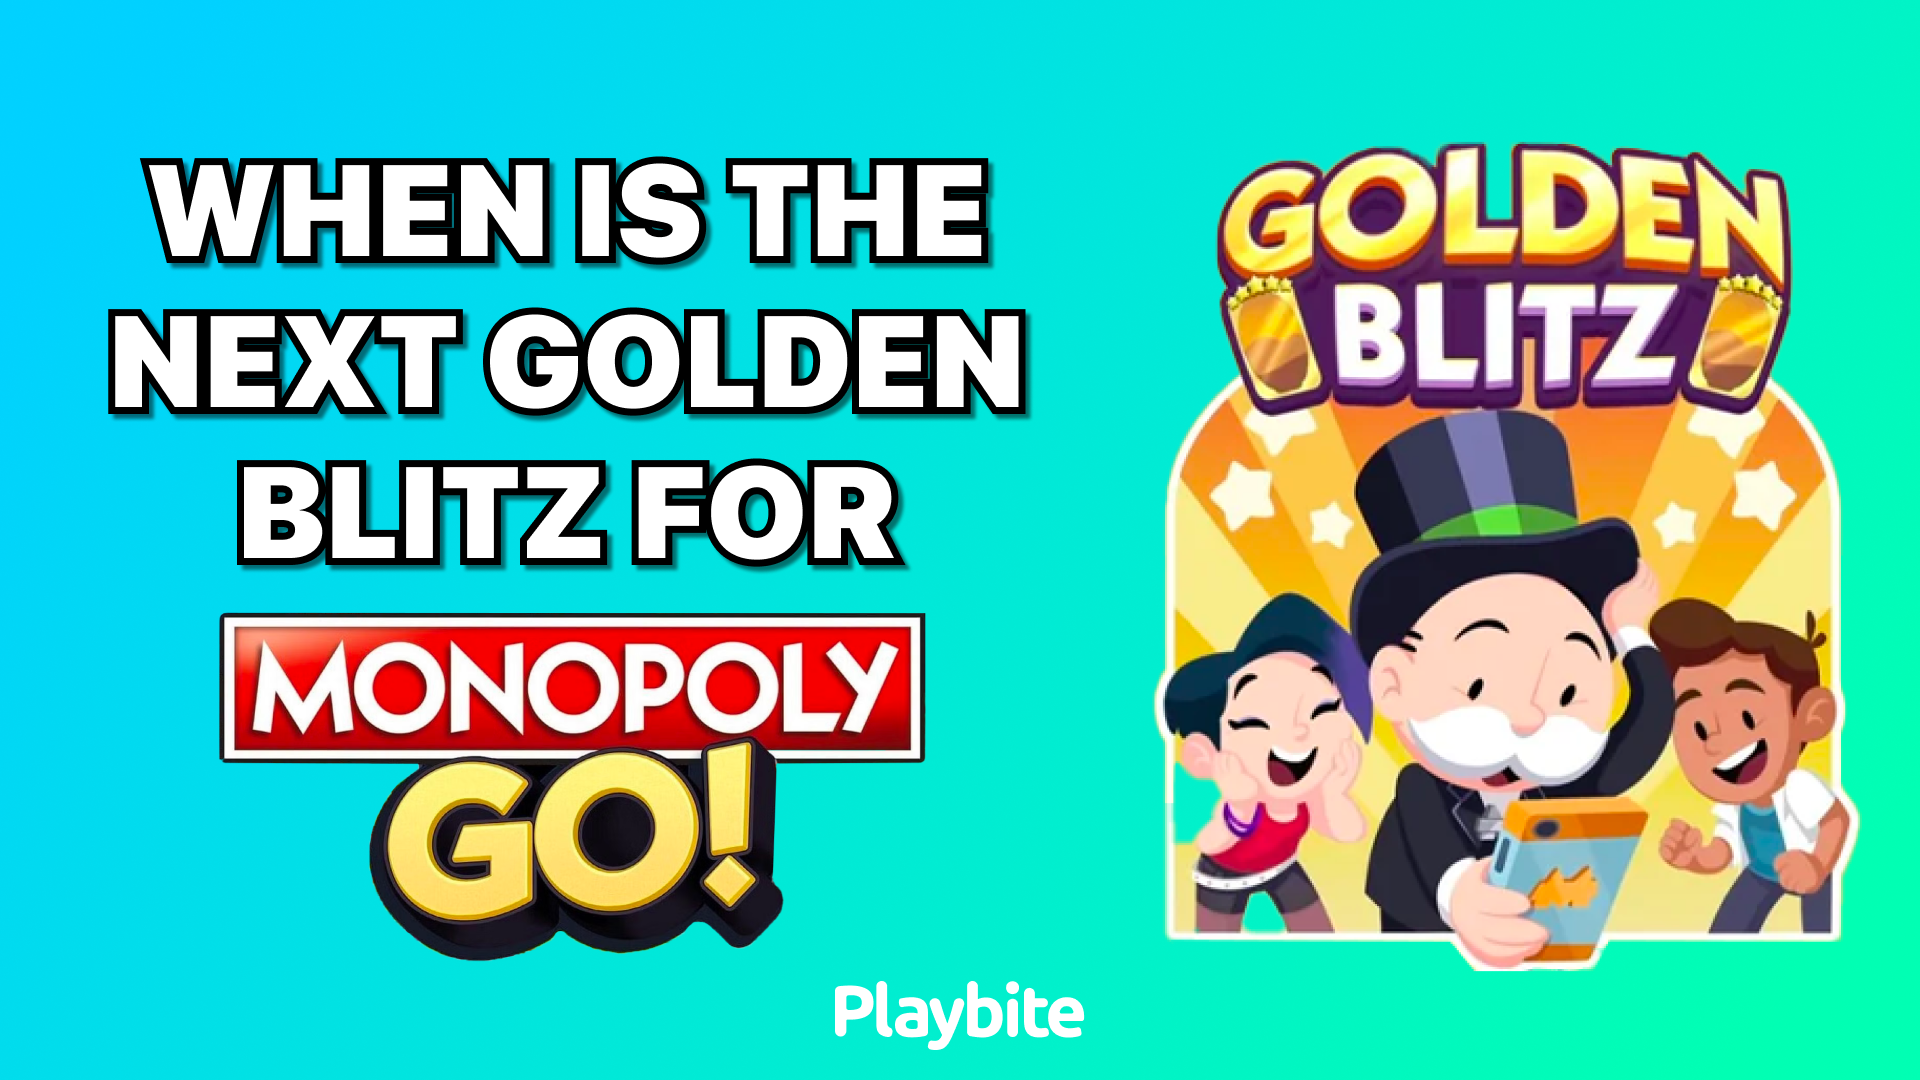 When Is the Next Golden Blitz for Monopoly Go? Find Out Here!